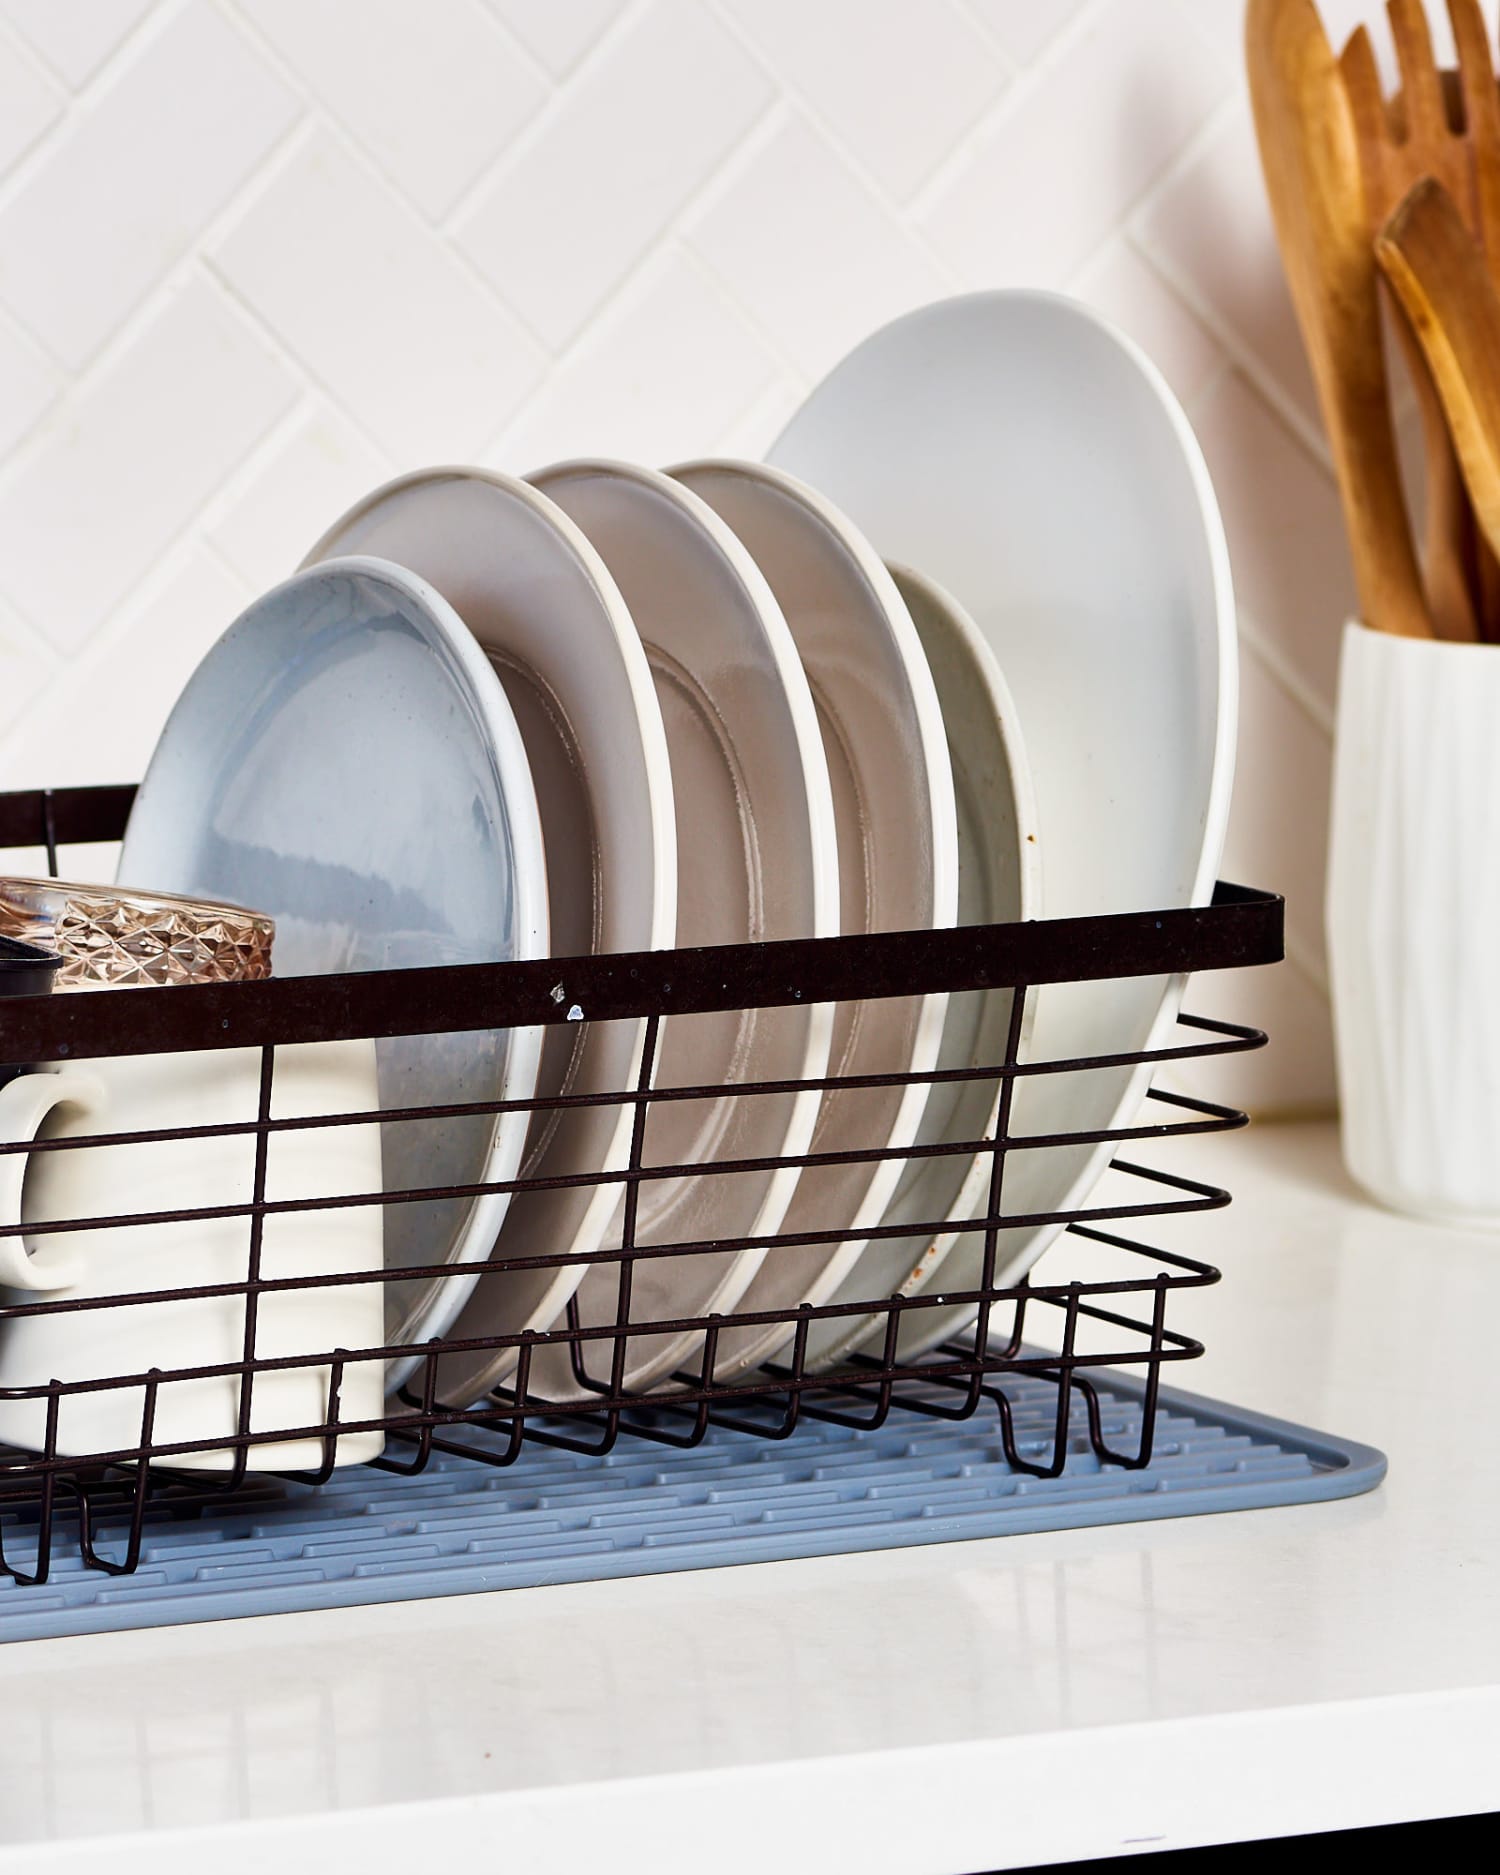 This $30 Space-Saving Drying Rack Changed My Cleaning Habits — And It’s on Sale for Half the Price